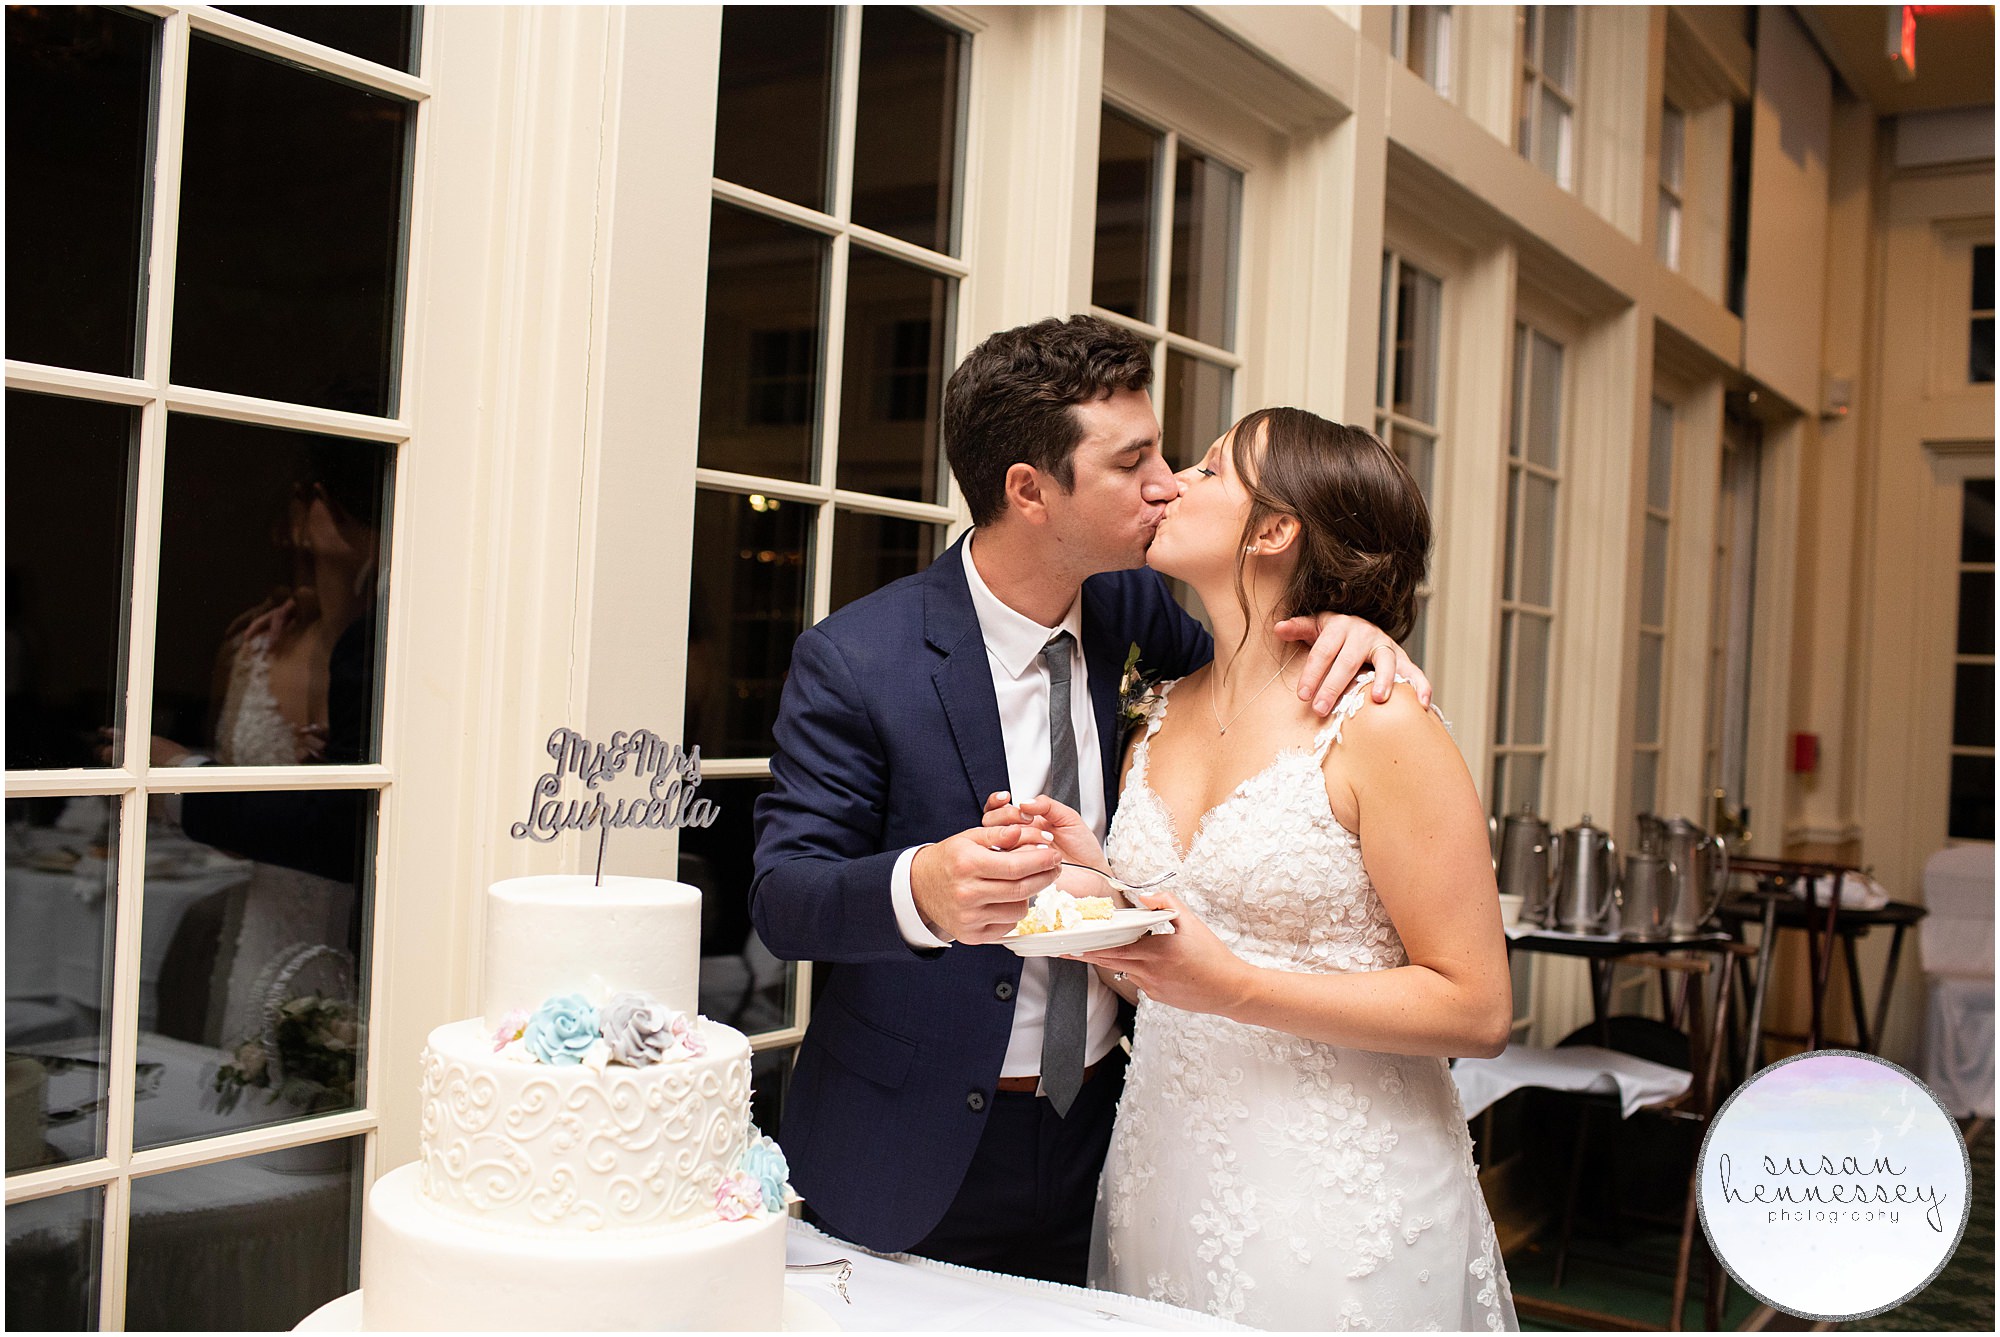 Bride and groom kiss after cutting cake on wedding day.